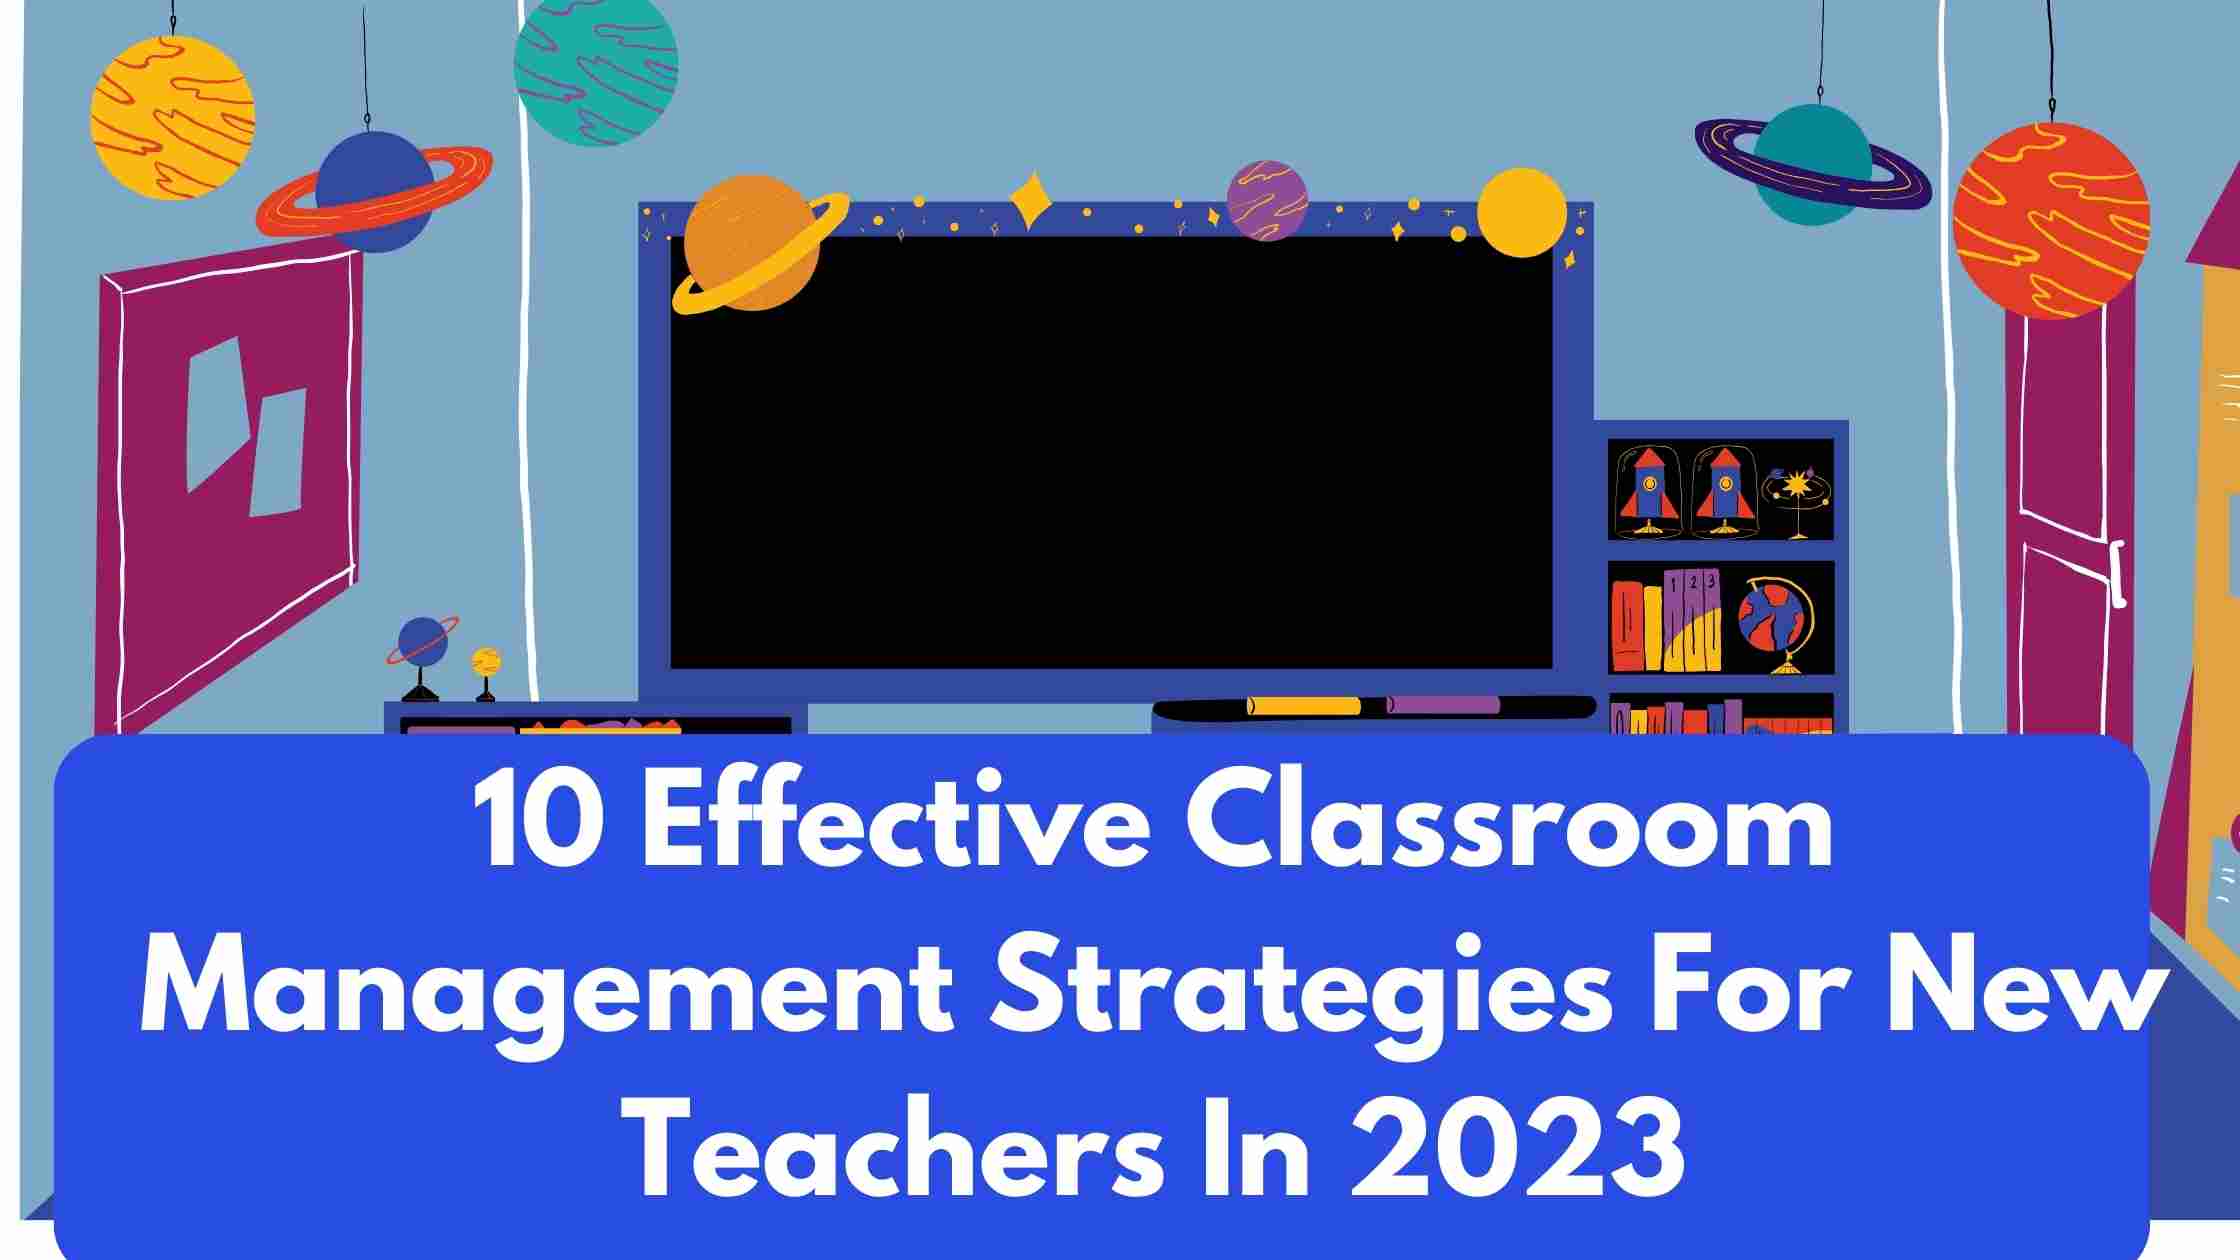 10 Effective Classroom Management Strategies For New Teachers In 2023